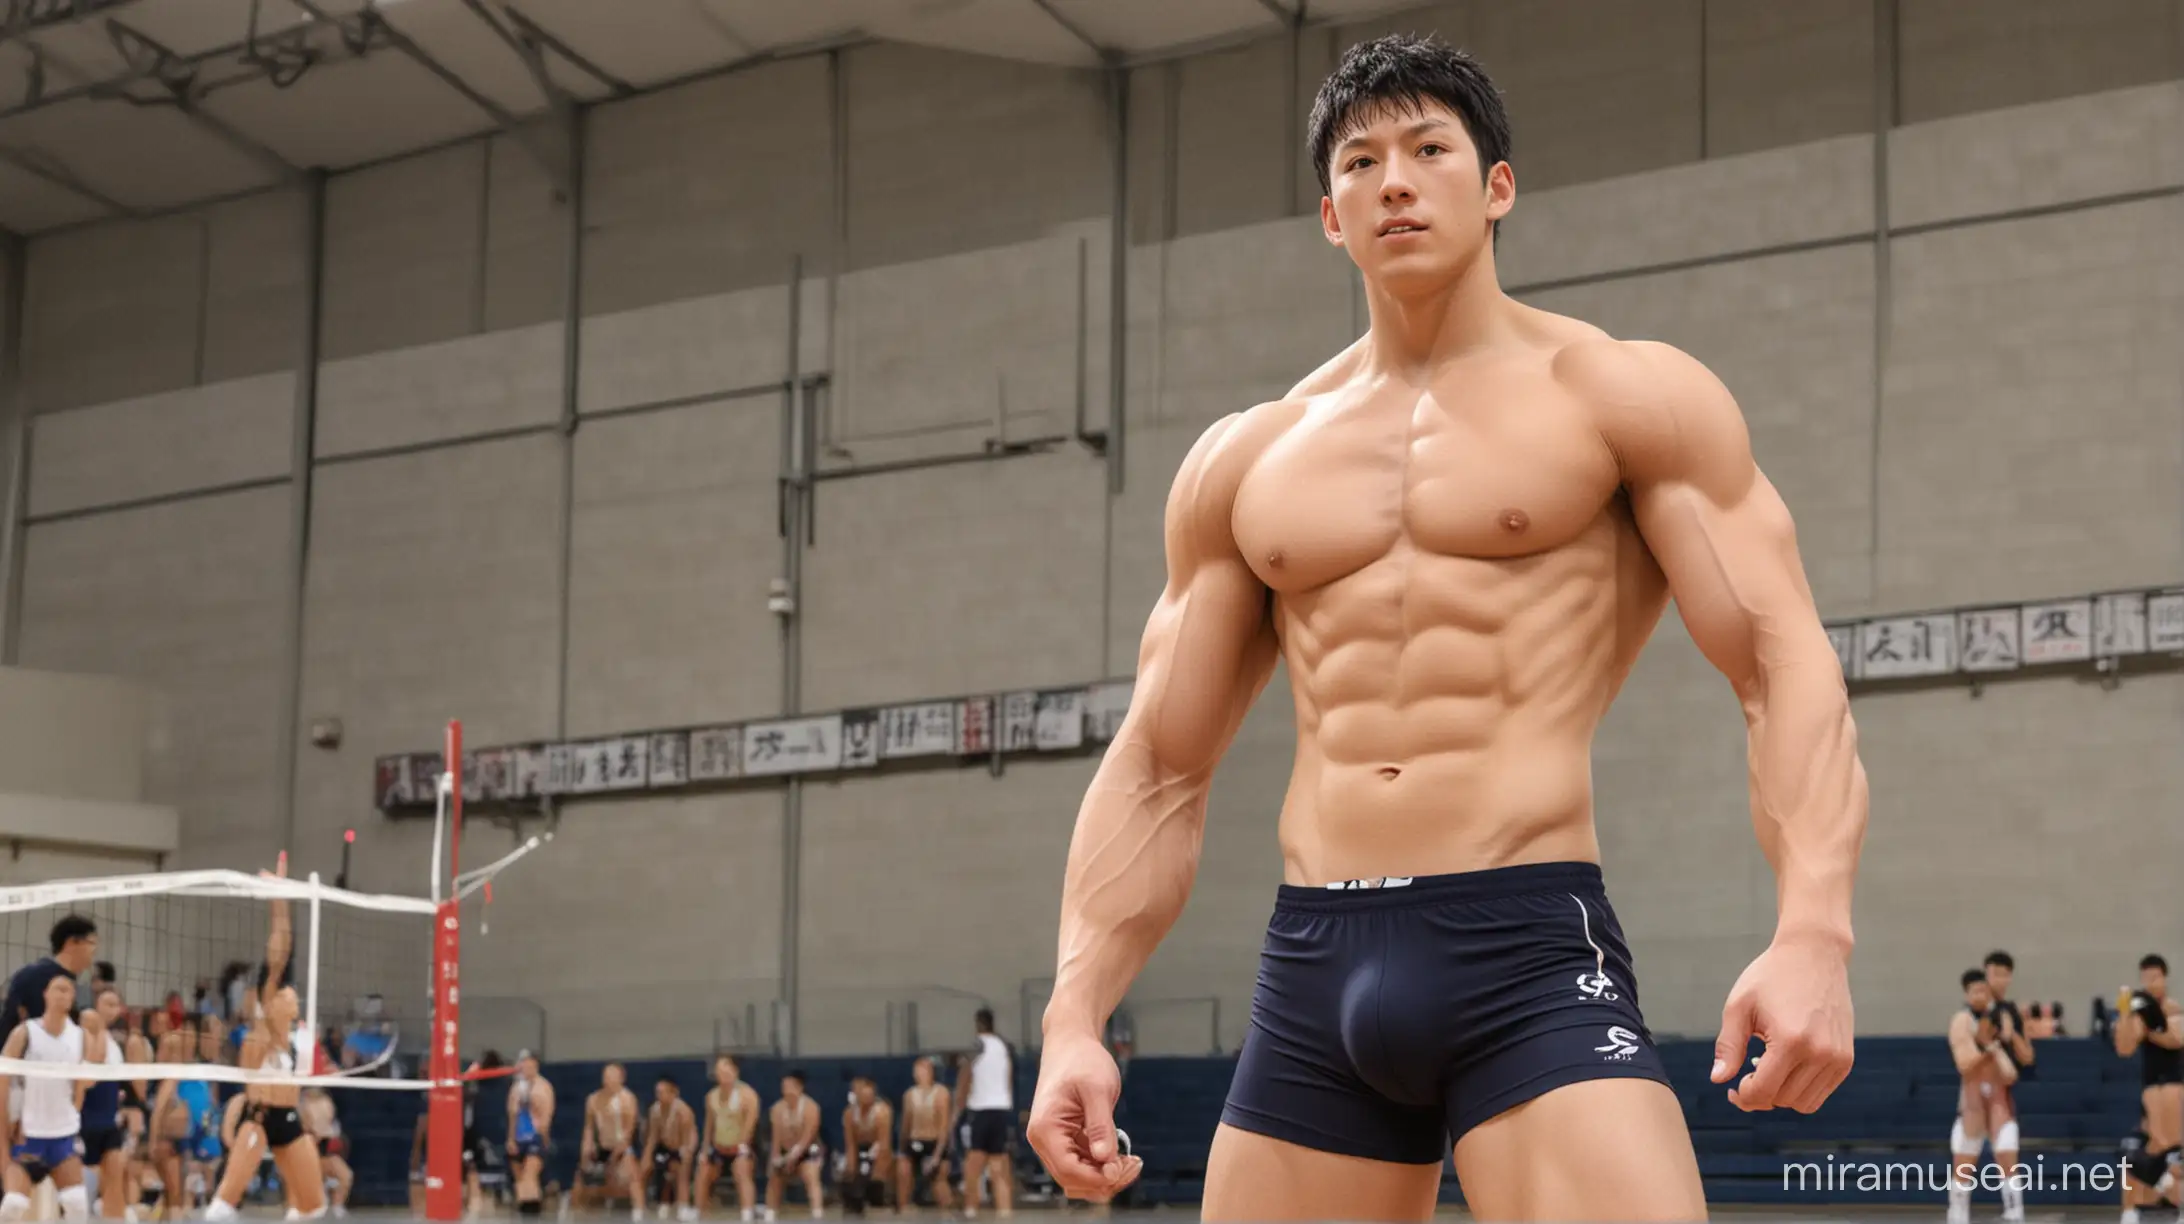 Muscular Hinata Shouyou Dominates Volleyball Court with Shirtless Flex